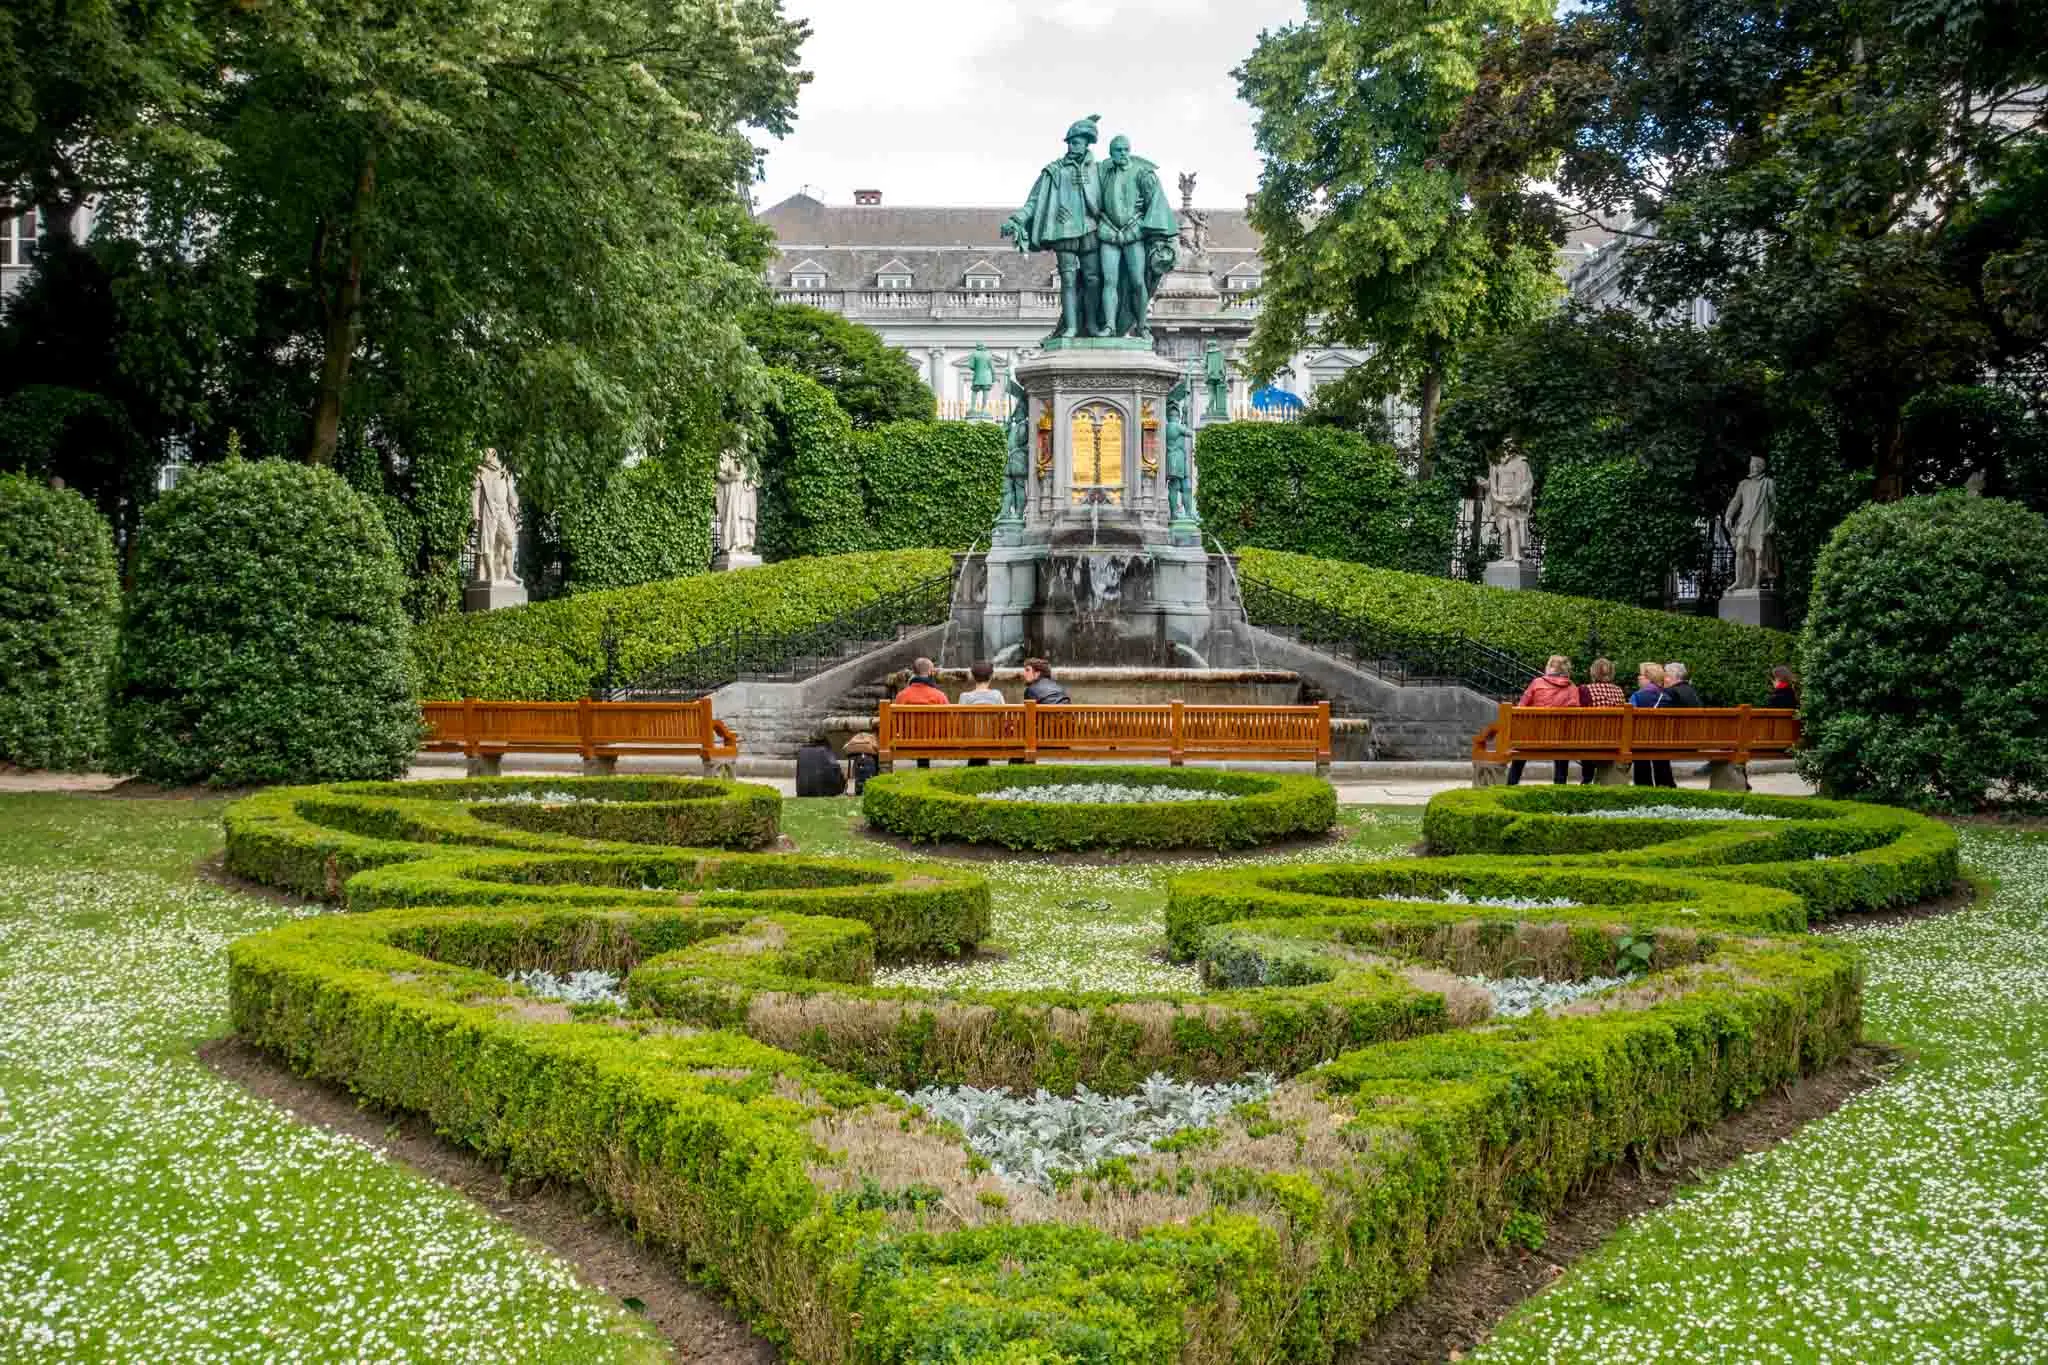 Park with manicured garden, fountain, and visitors on benches